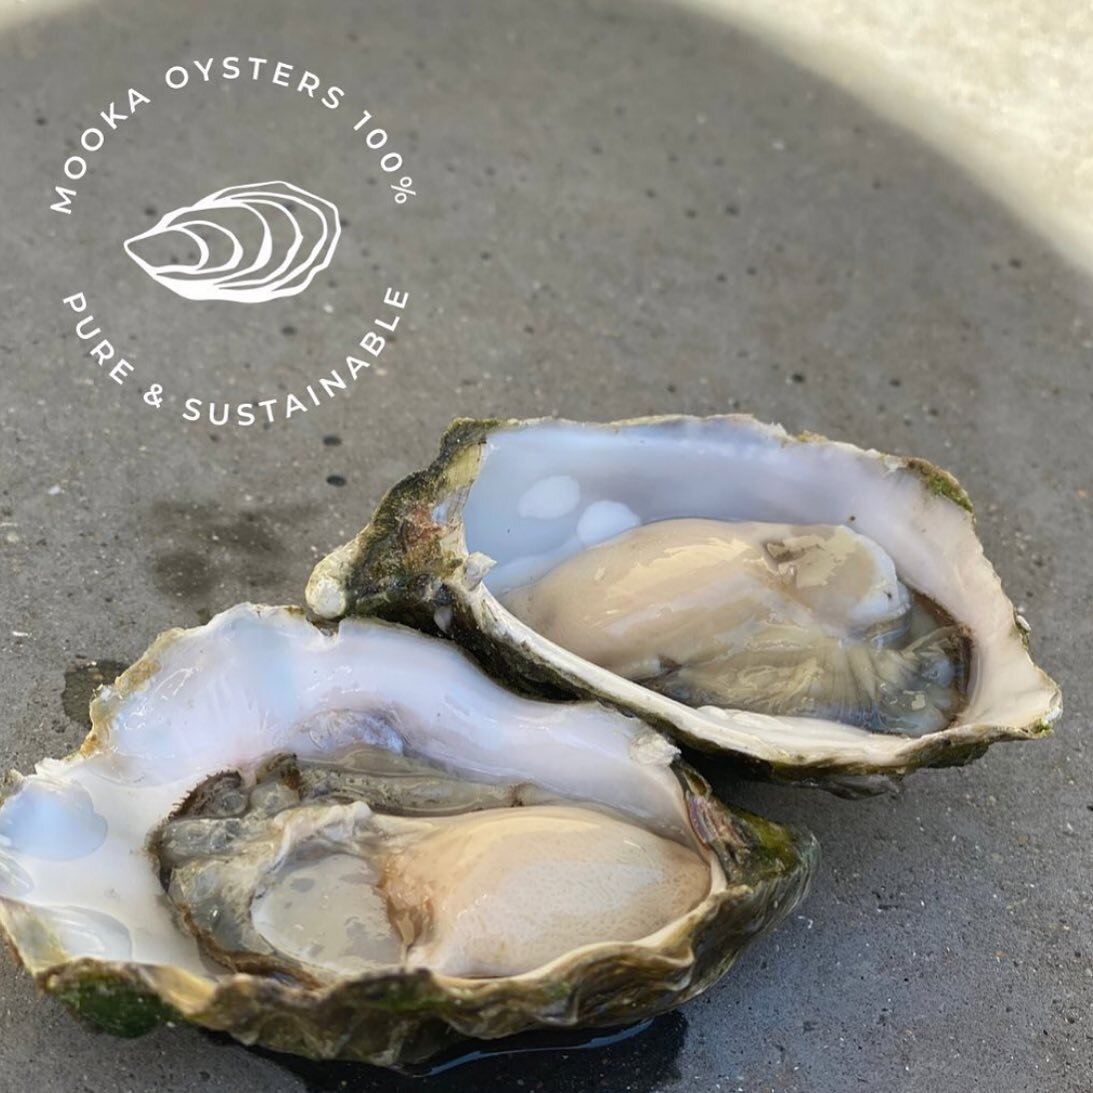 We&rsquo;re back!! Lockdowns are no fun for anyone so we&rsquo;re trying to bring a smile to all the oyster lovers out there. Five dozen deliveries are back. Delivery will be this Friday morning. Check the website for our delivery locations.
Orders m